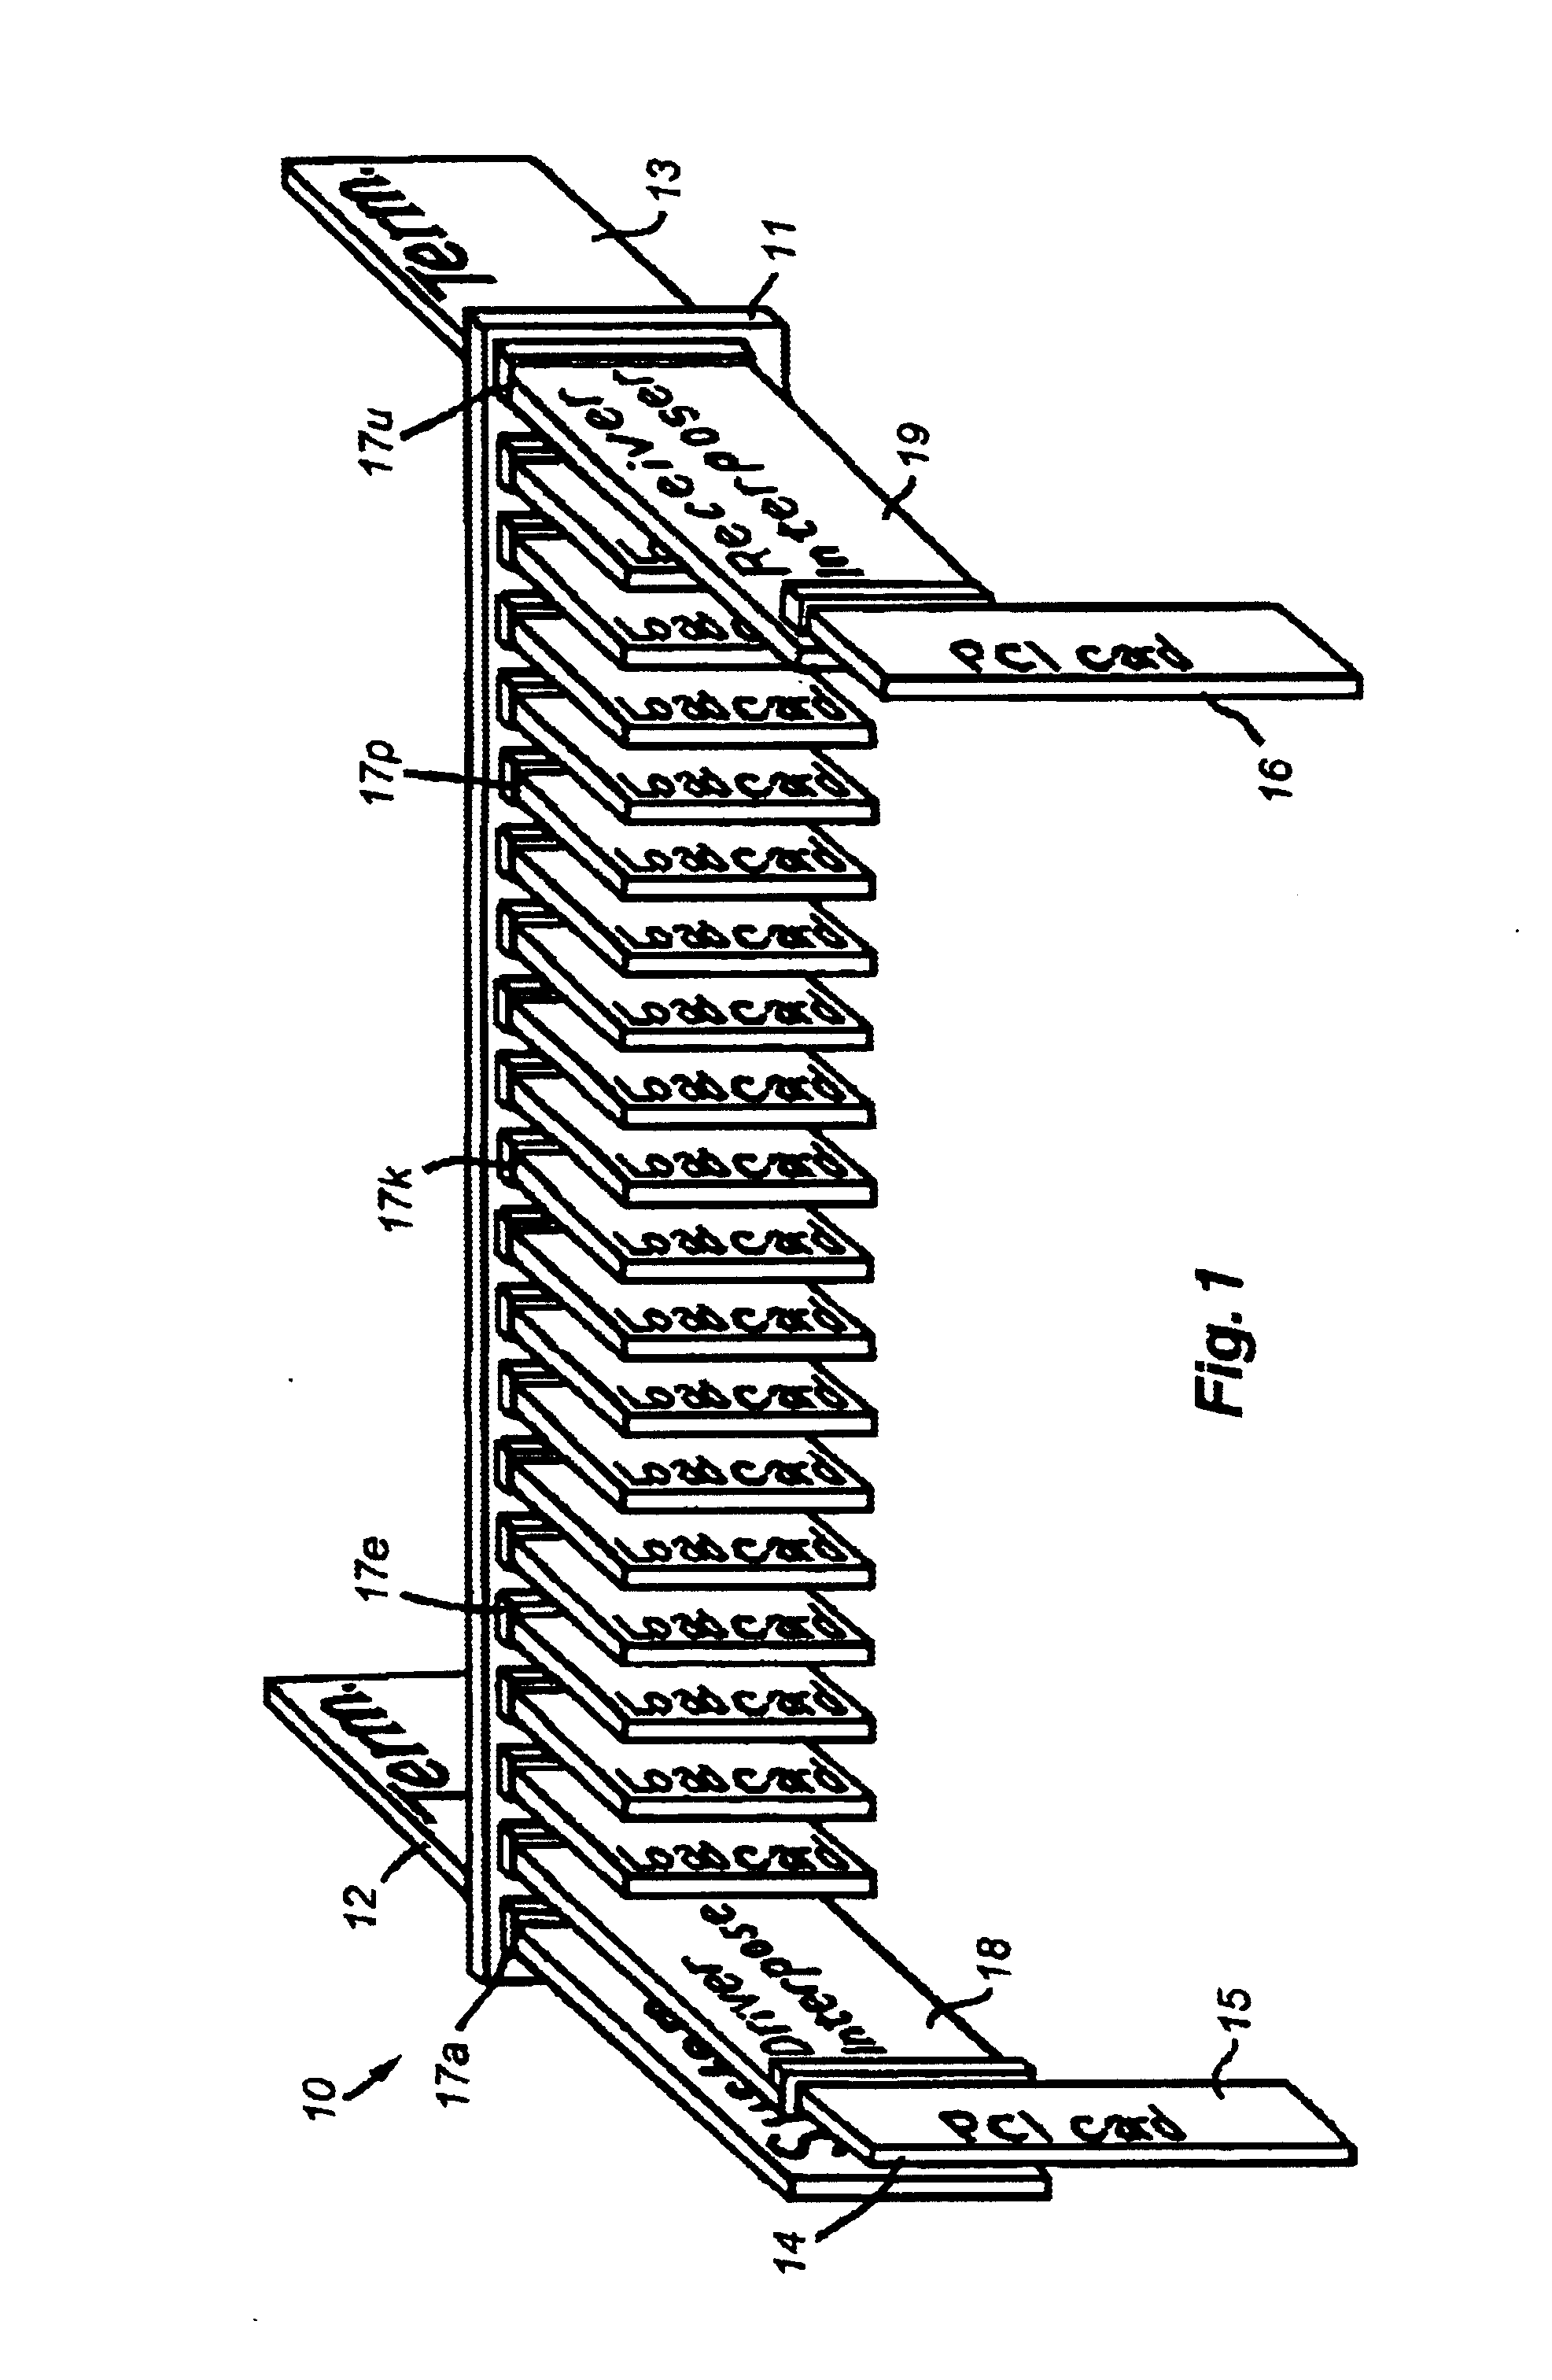 Backplane system using incident waveform switching